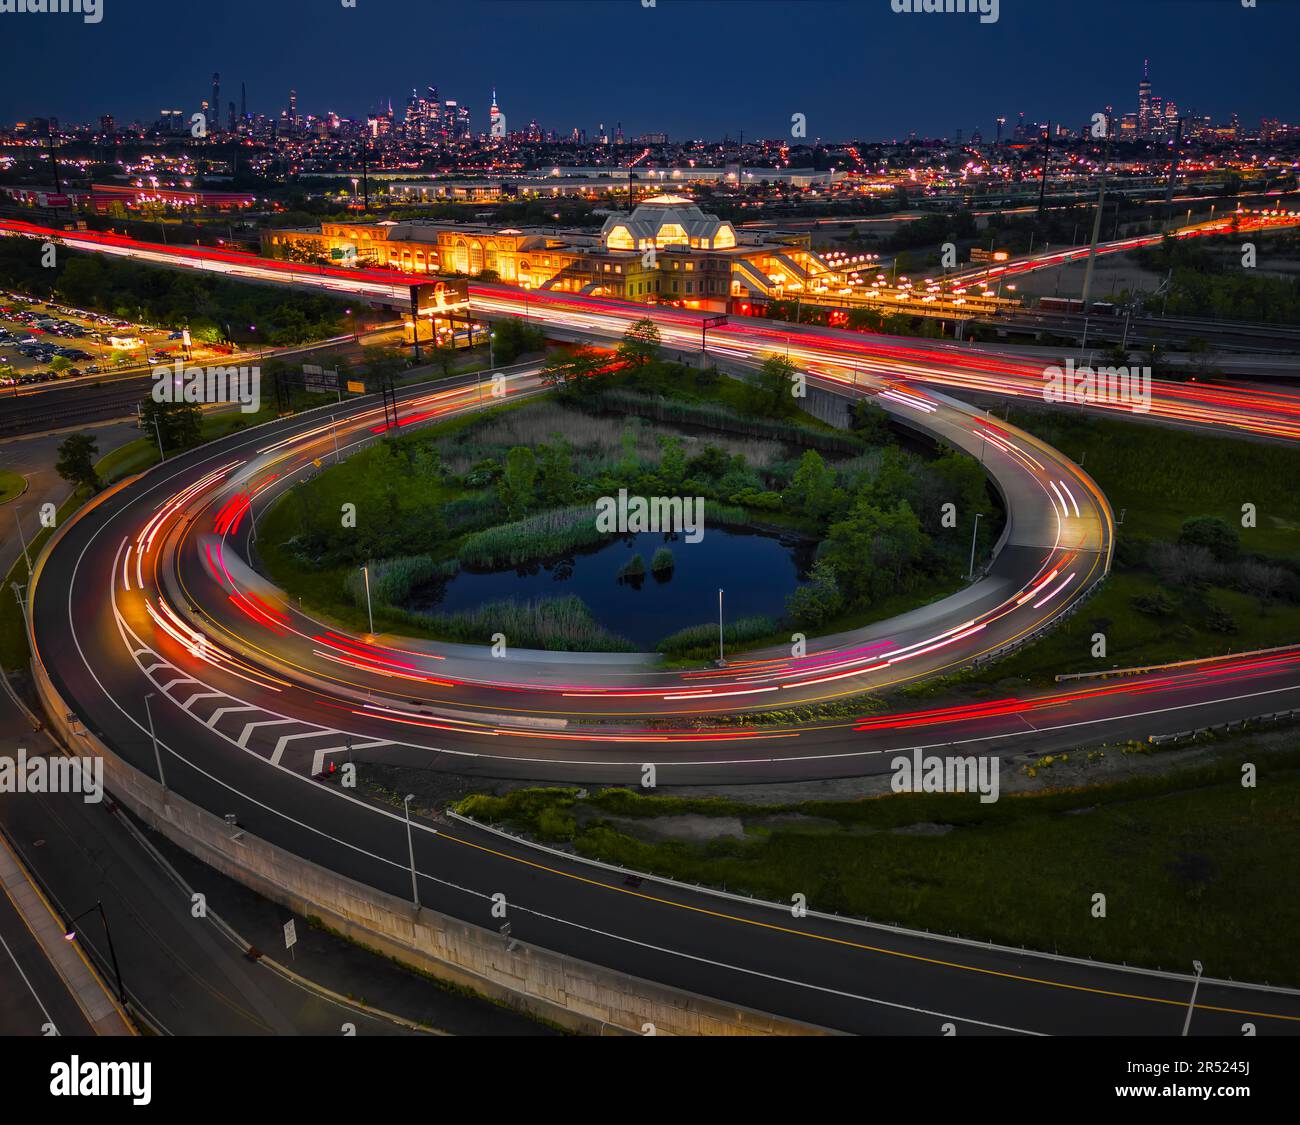 Secaucus Junction Station And NYC - Aerial long exposure view to the New Jersey Turnpike's very long ramp, the illuminated train station along  with a Stock Photo